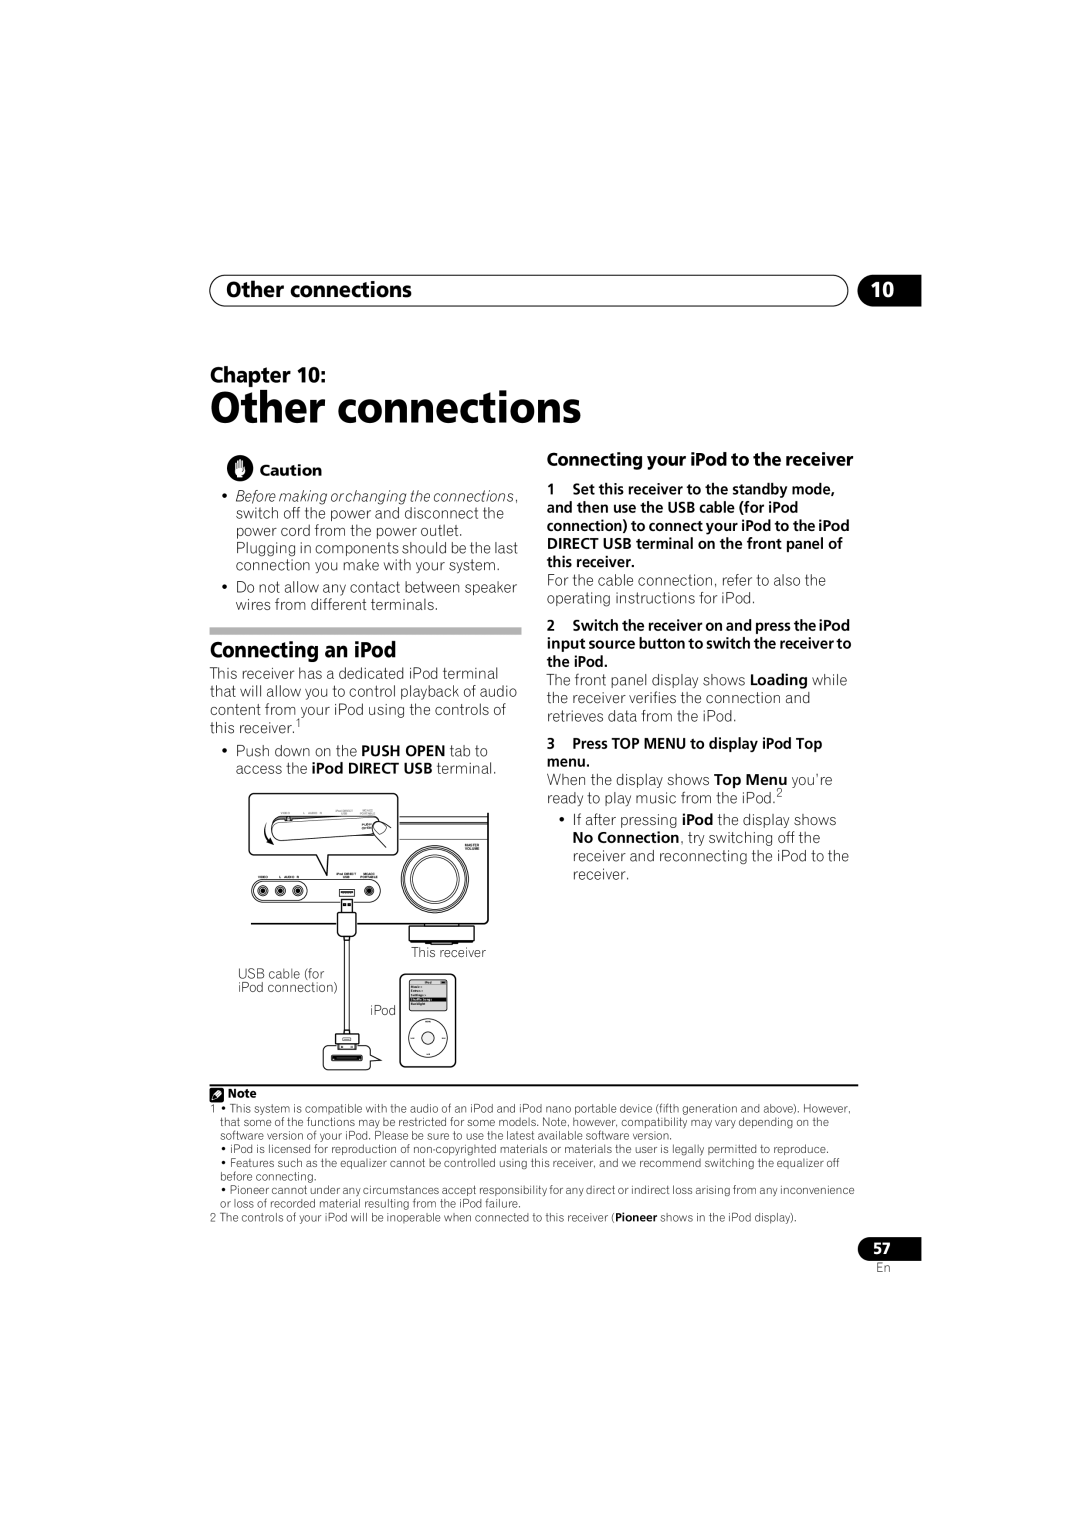 Pioneer VSX-818V-K manual Other connections Chapter, Connecting an iPod, Connecting your iPod to the receiver, English 